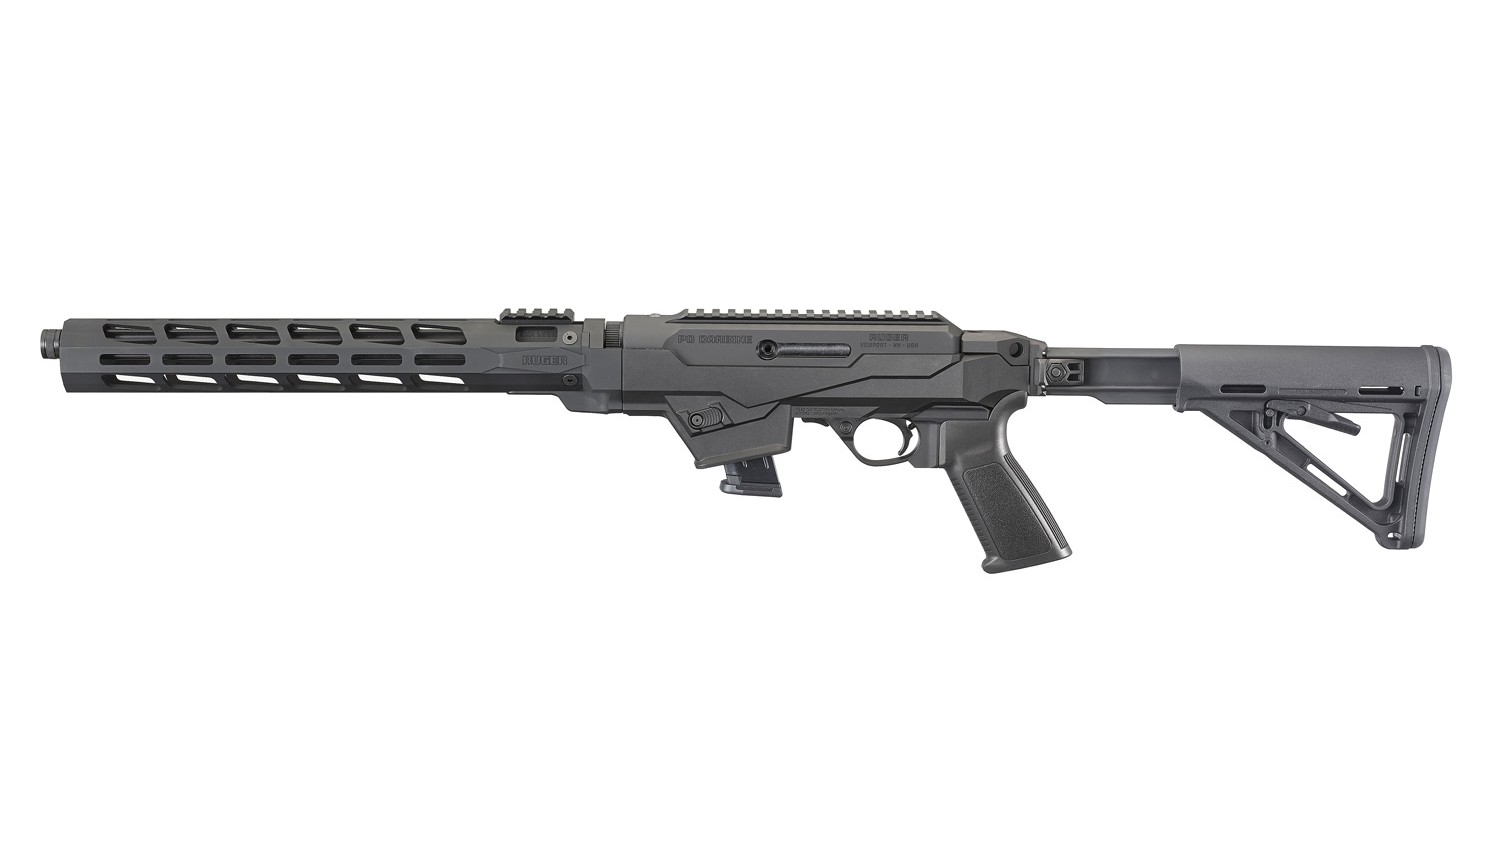 ruger 9mm rifle review